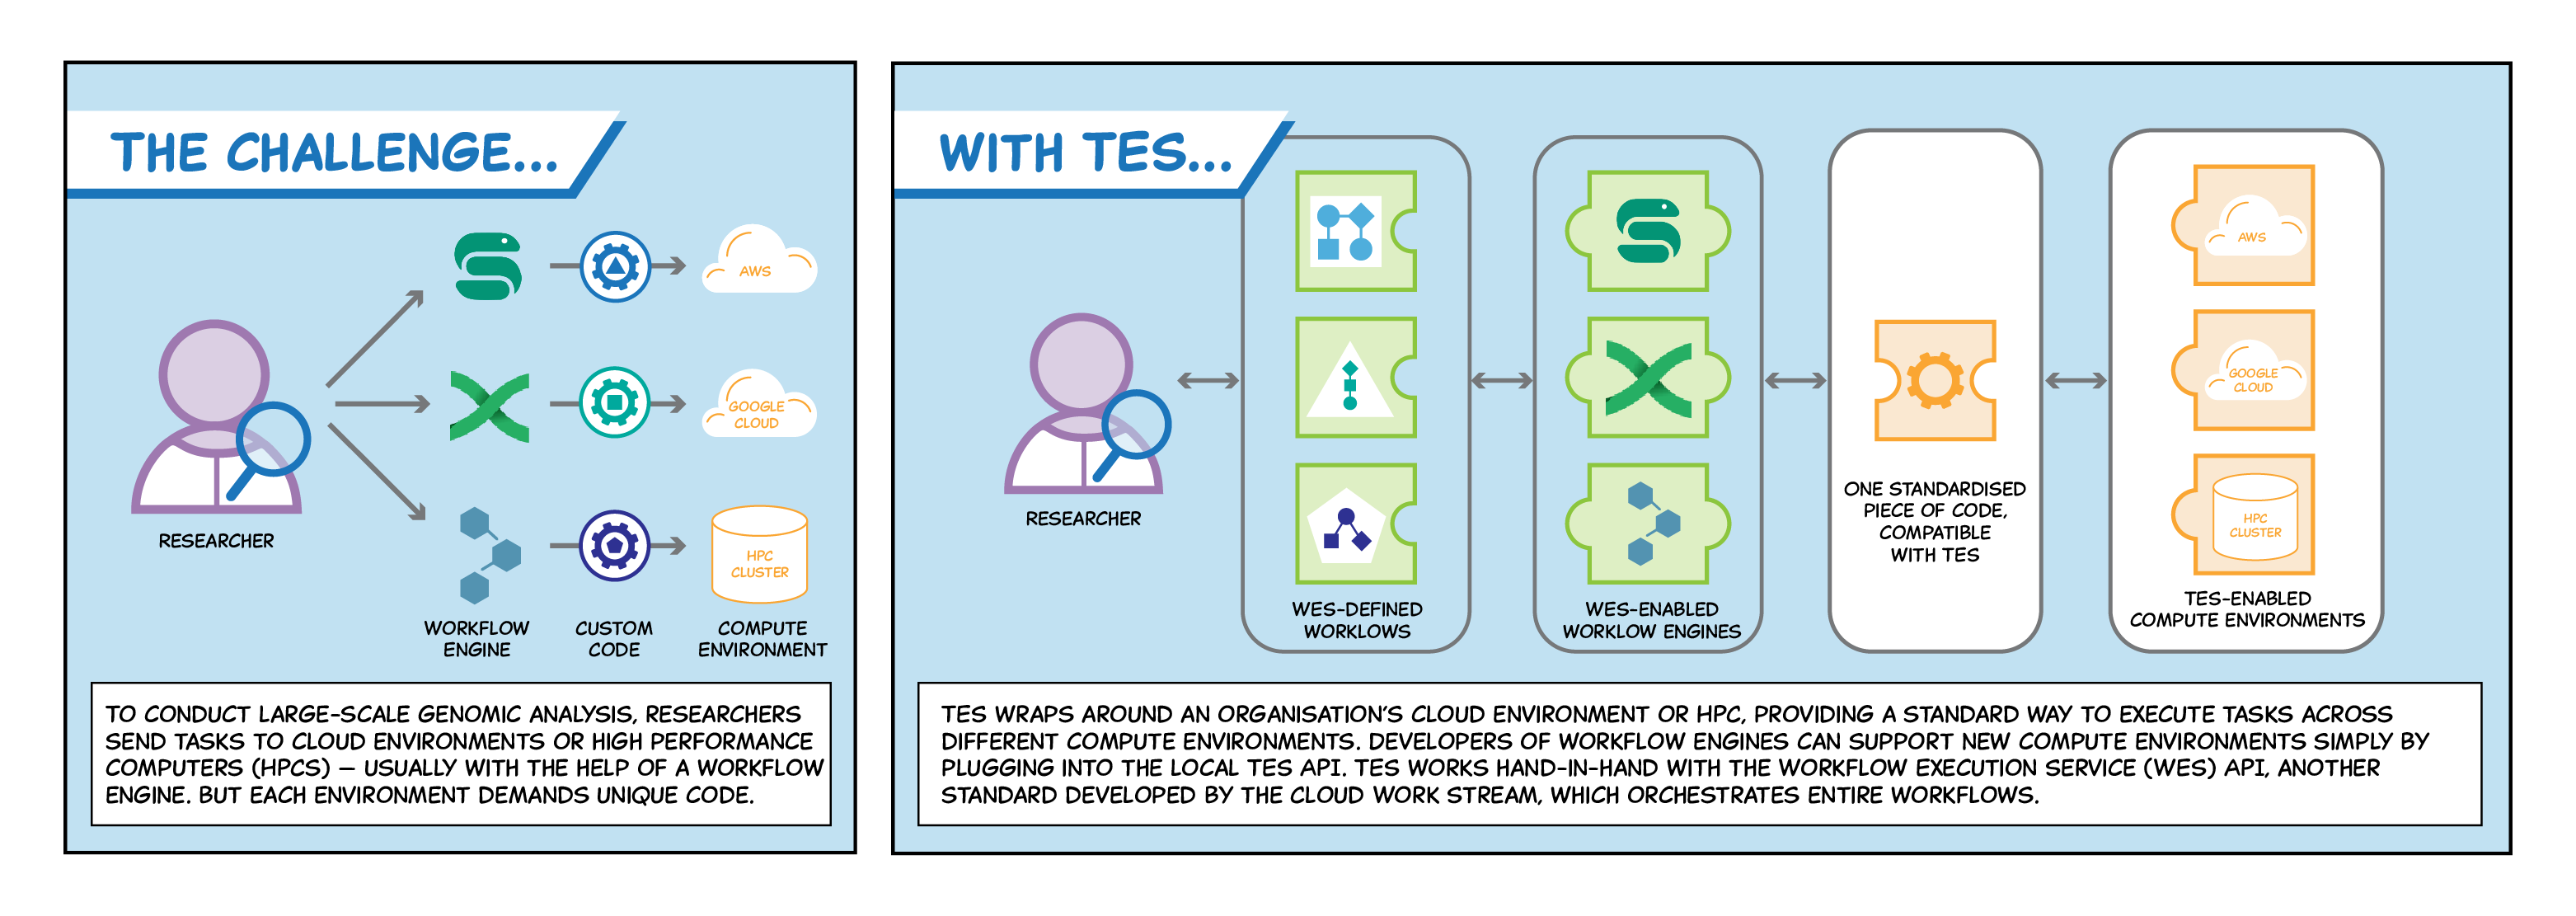 A comic explaining the challenges of large-scale genomic analysis and how the Task Execution Service (TES) API helps.